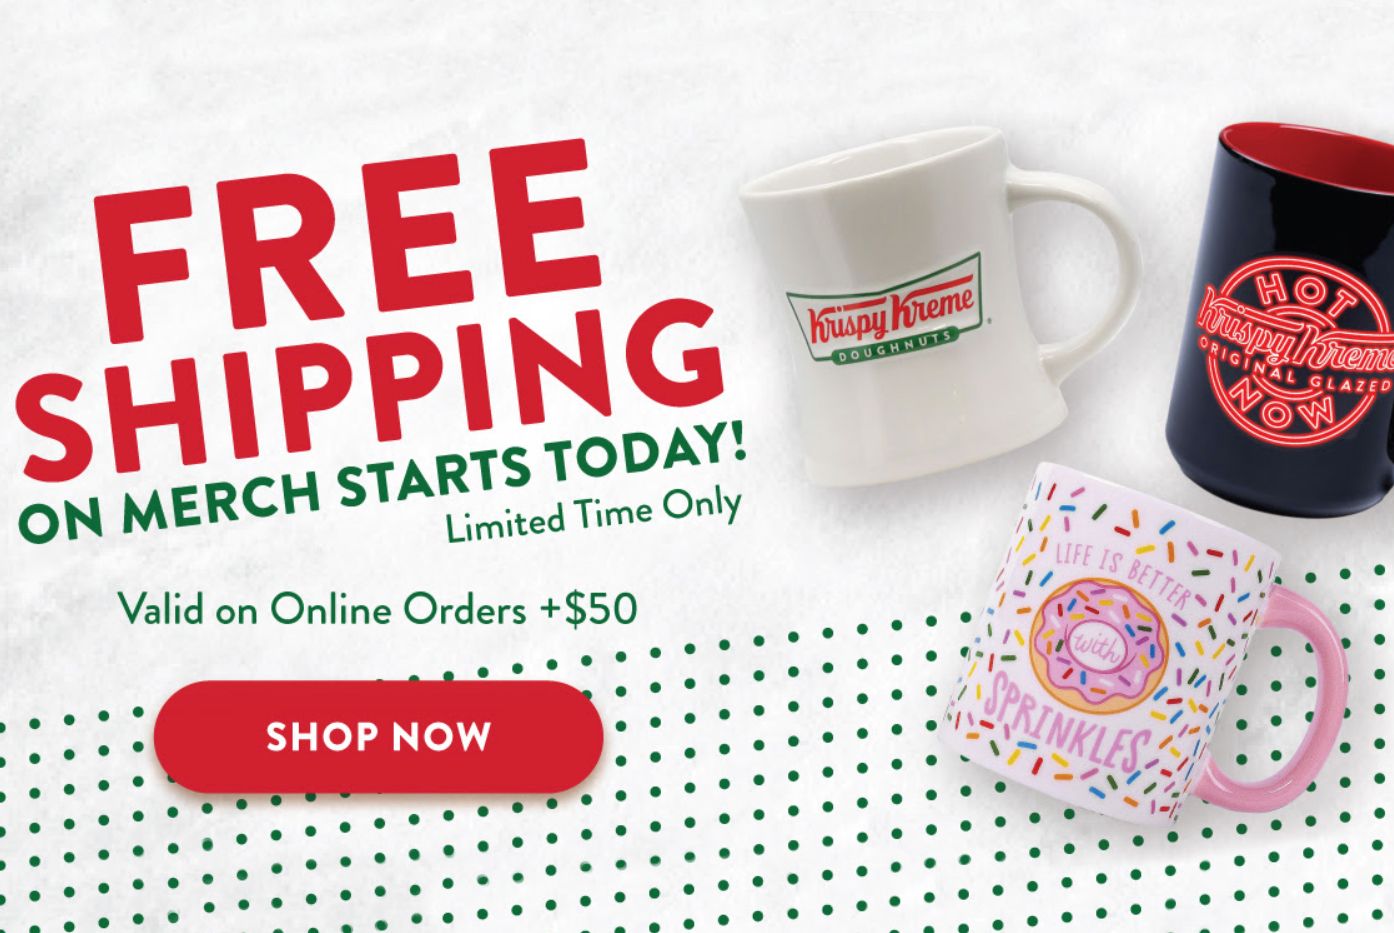 Free Shipping on $50+ Orders from the Krispy Kreme Online Shop Begins Today for a Limited Time Only